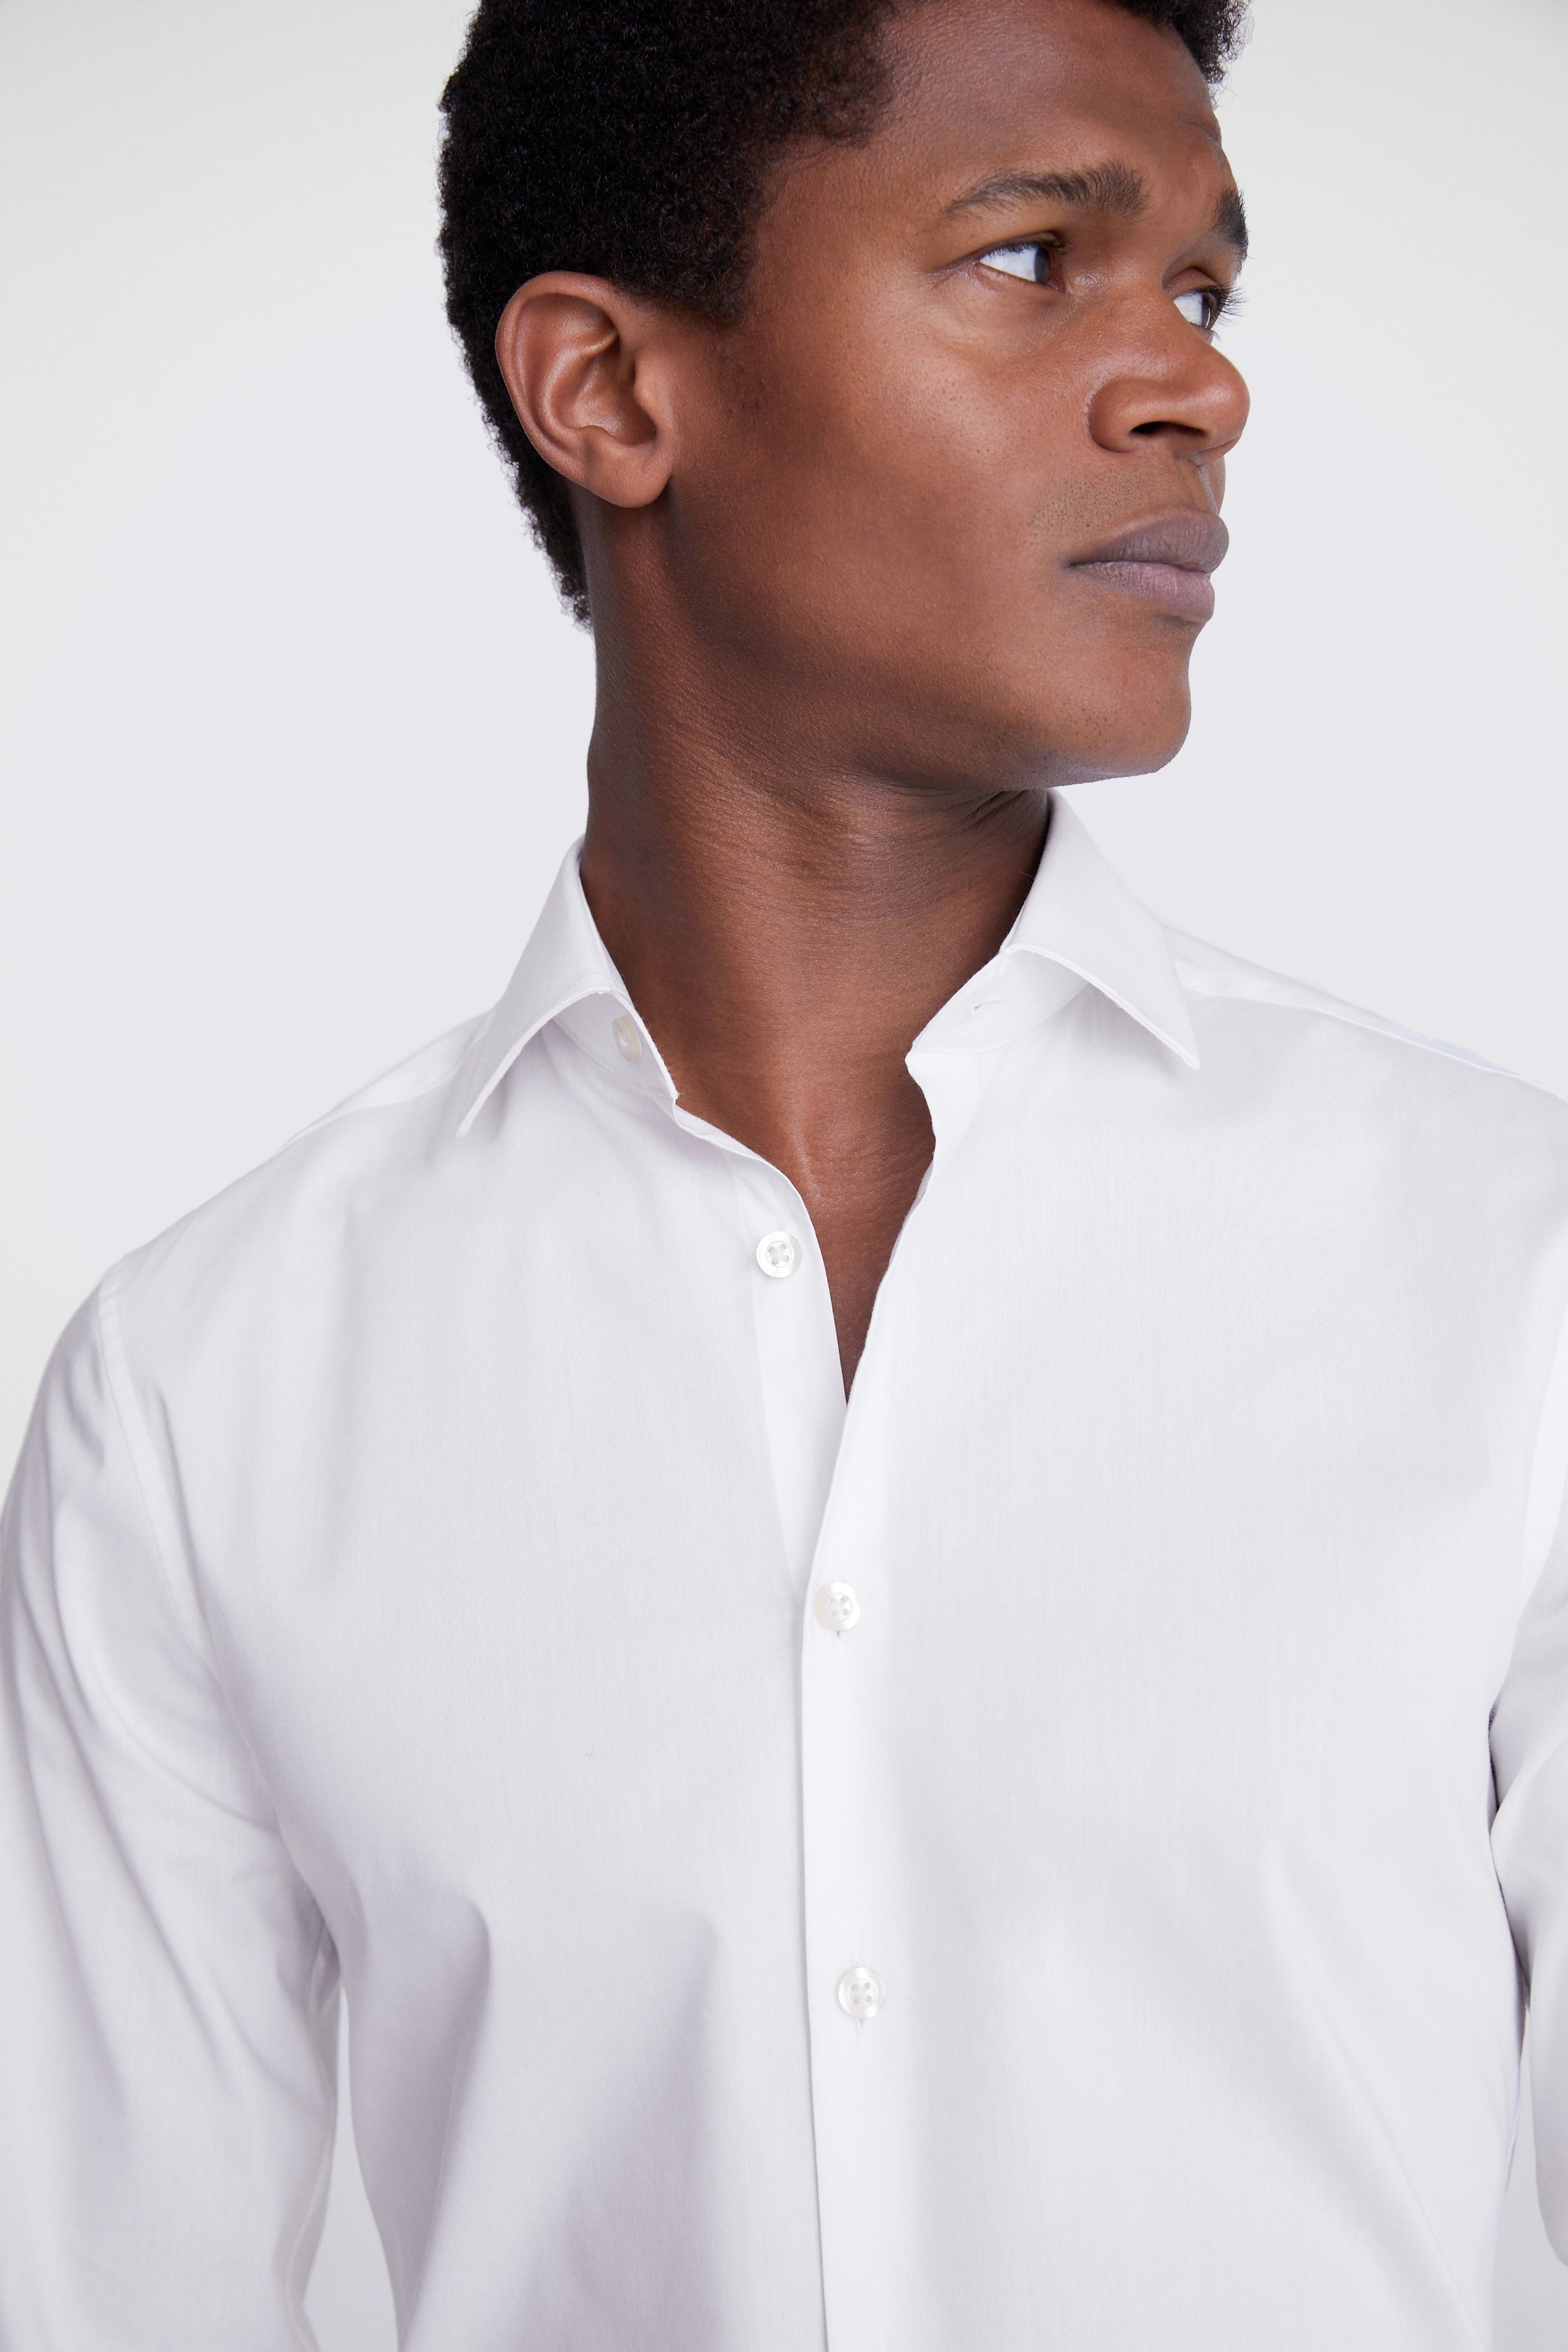 Tailored Fit White Performance Stretch Shirt | Buy Online at Moss